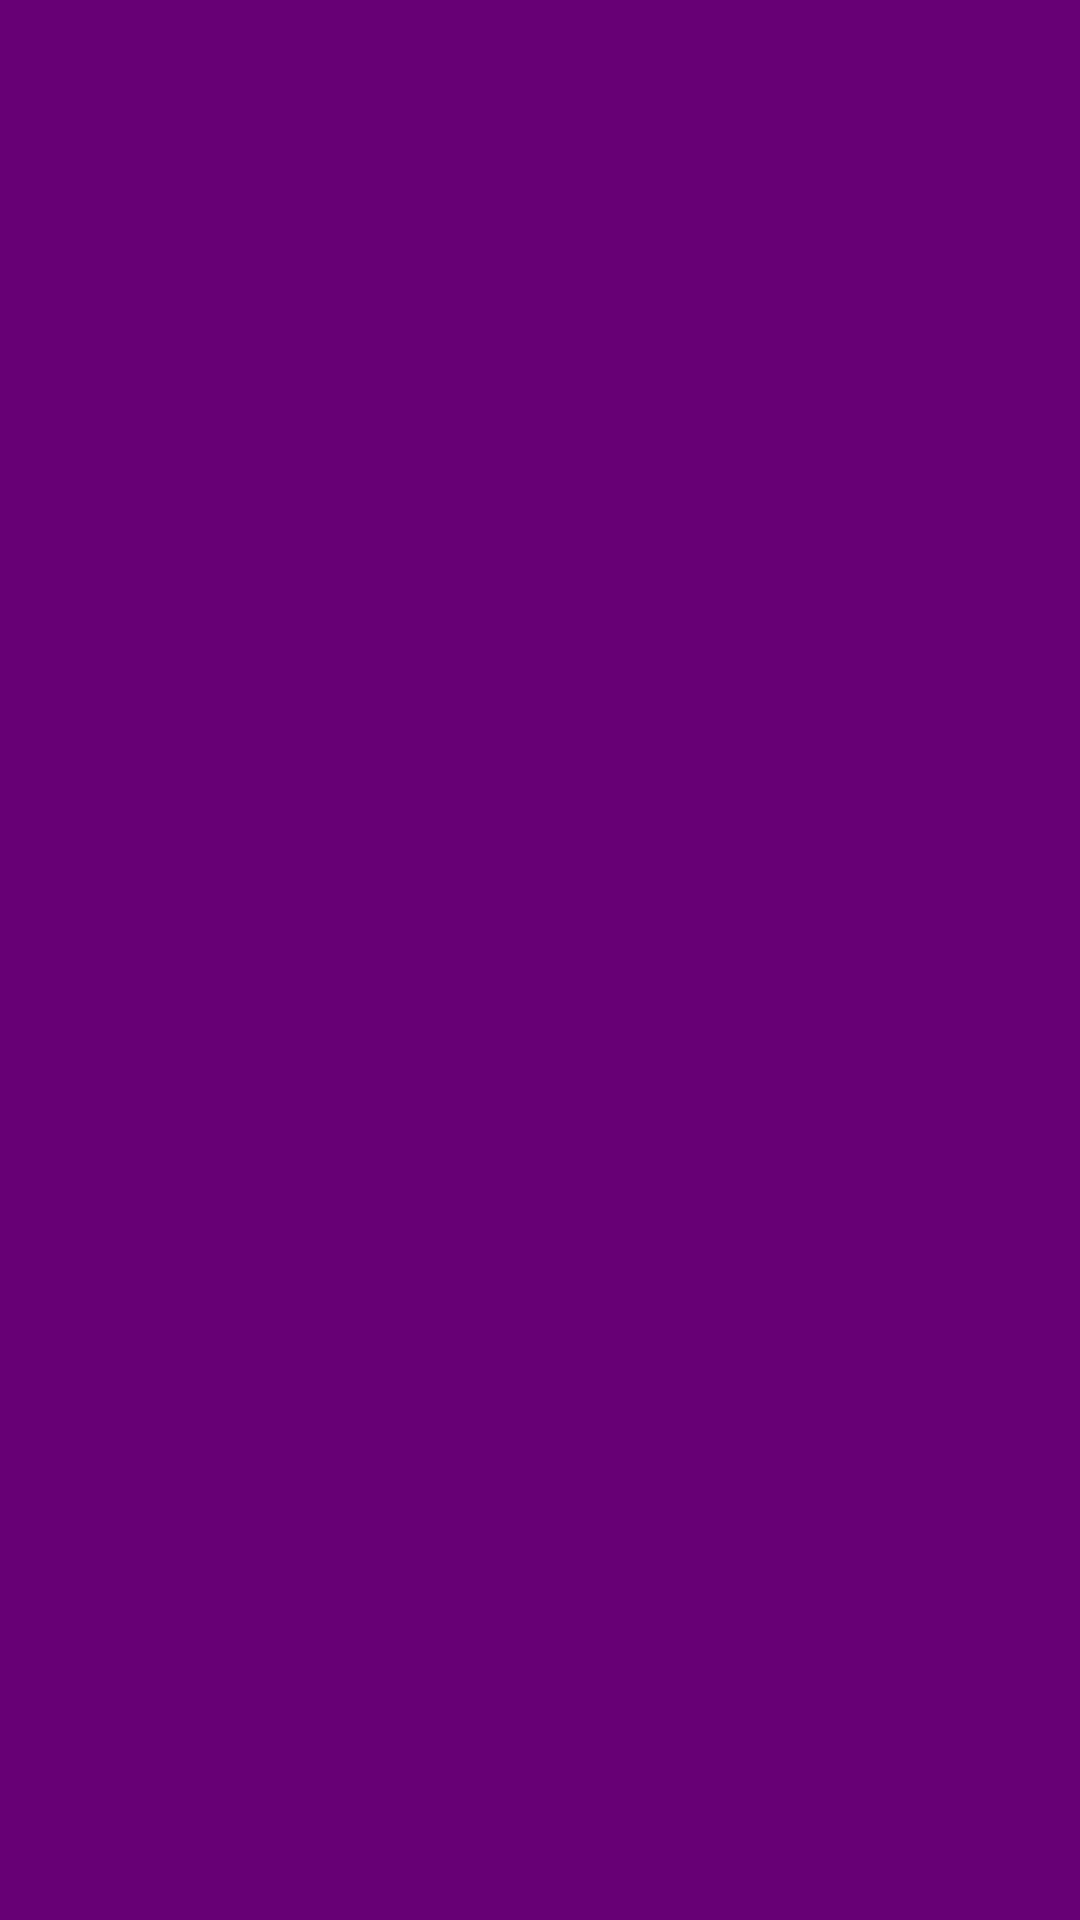 1080x1920 Solid Purple Wallpapers